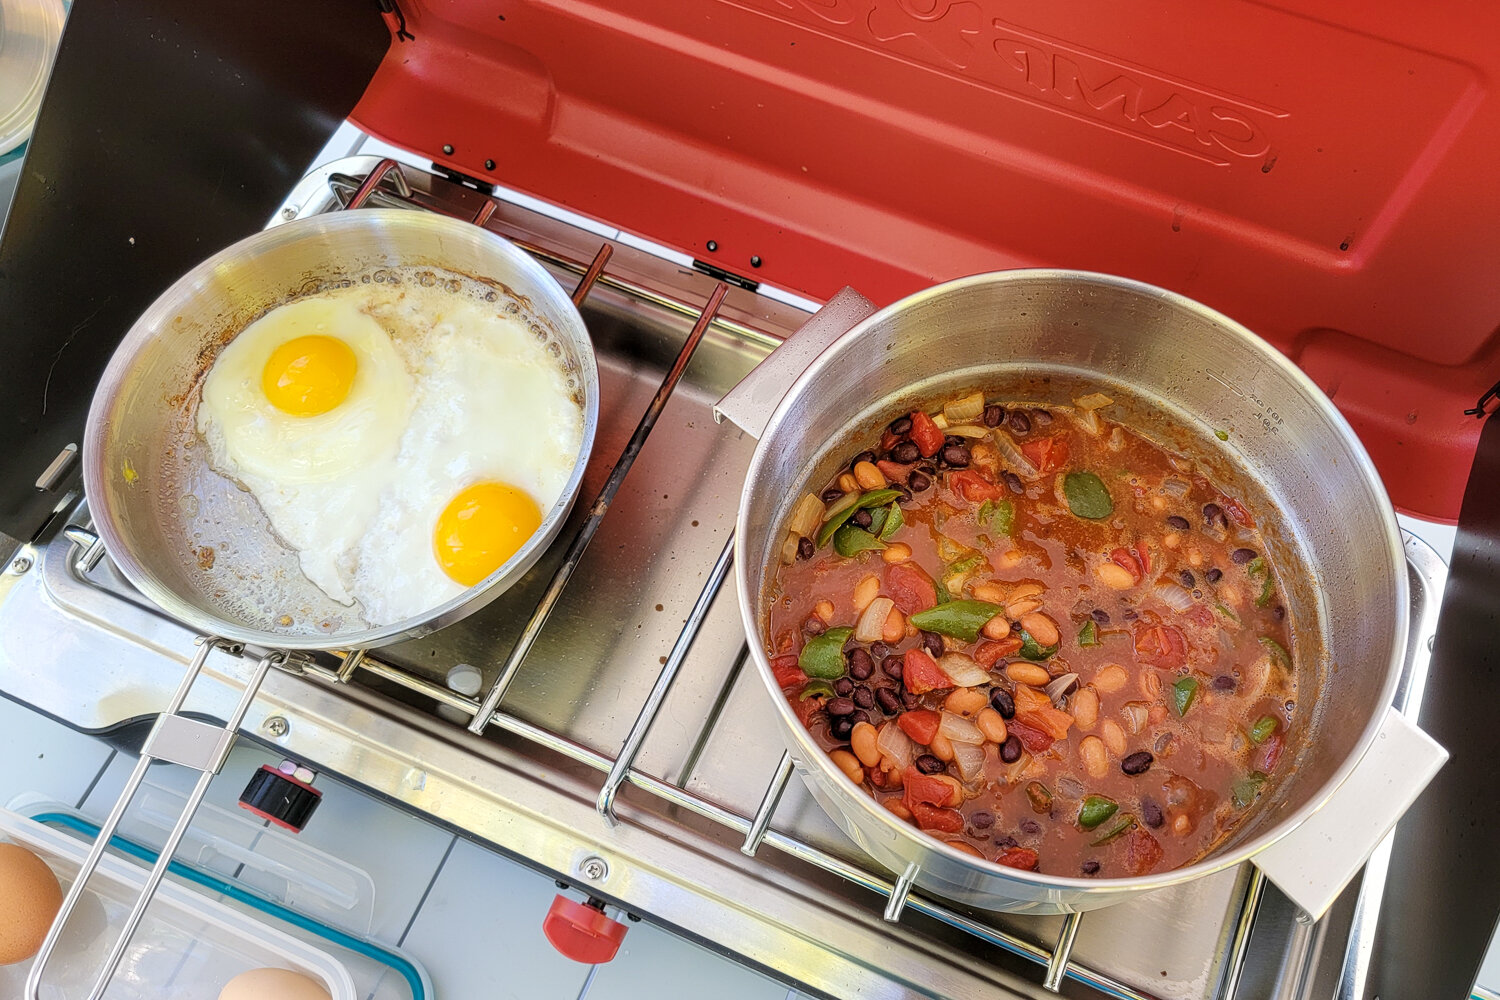 Making beans & eggs for breakfast in the Stanley Adventure Base Camp Cookset 4